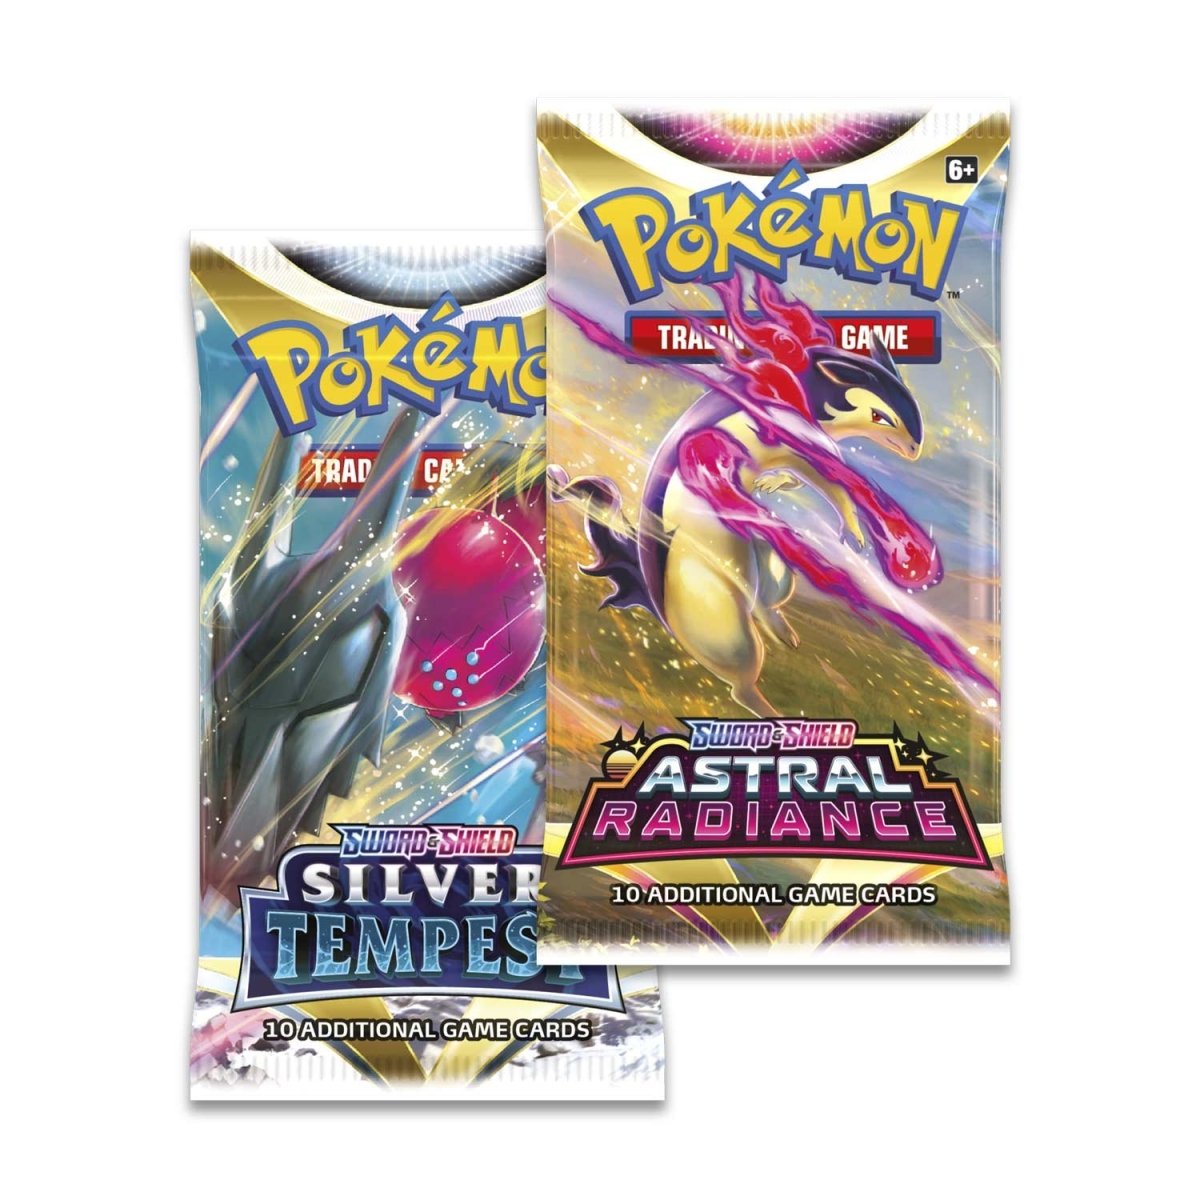 Pokémon TCG: Articuno, Zapdos & Moltres Cards with 2 Booster Packs